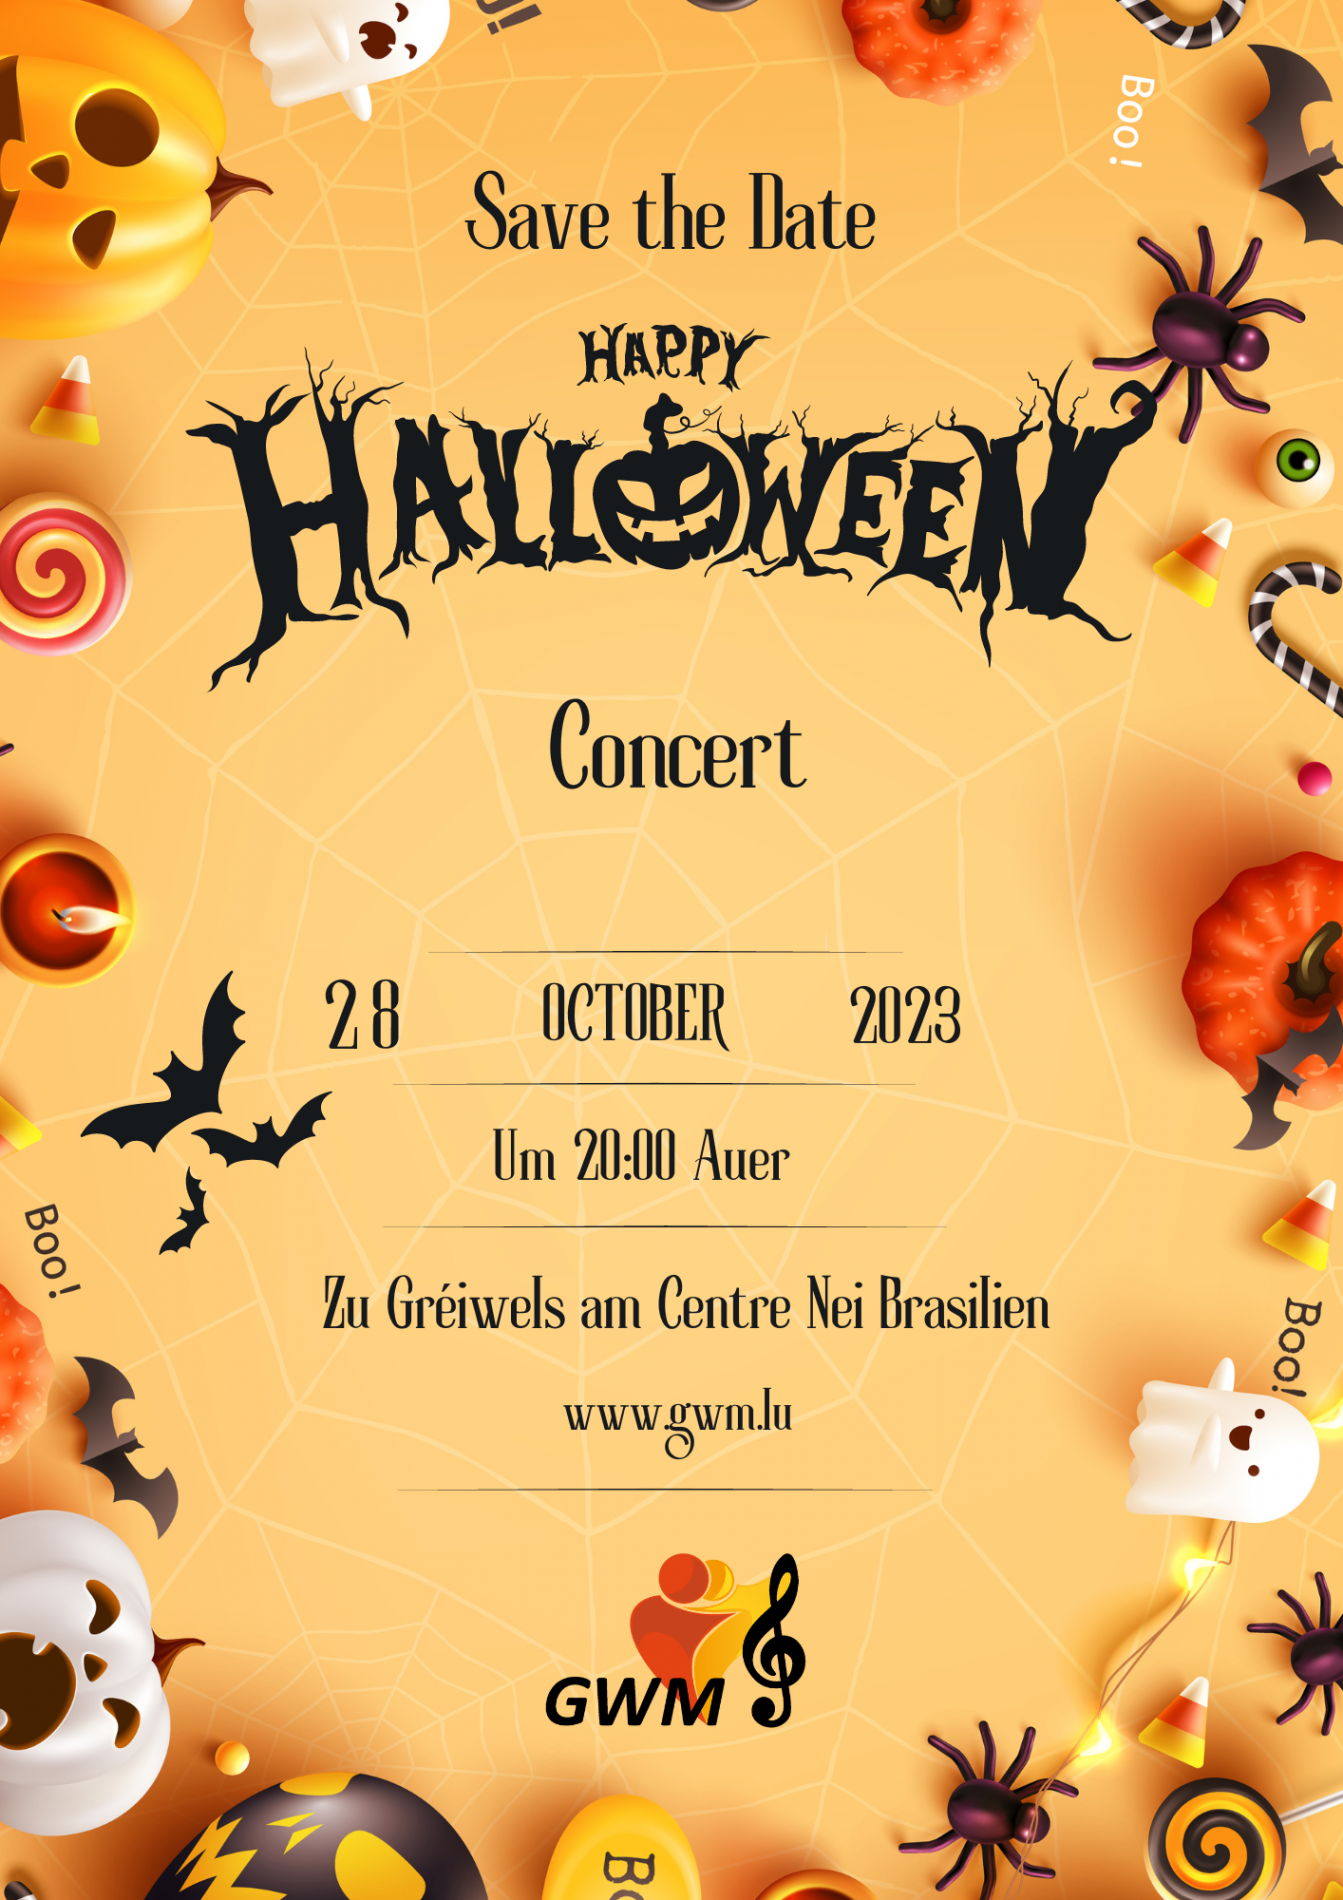 Save the date Happy Halloween